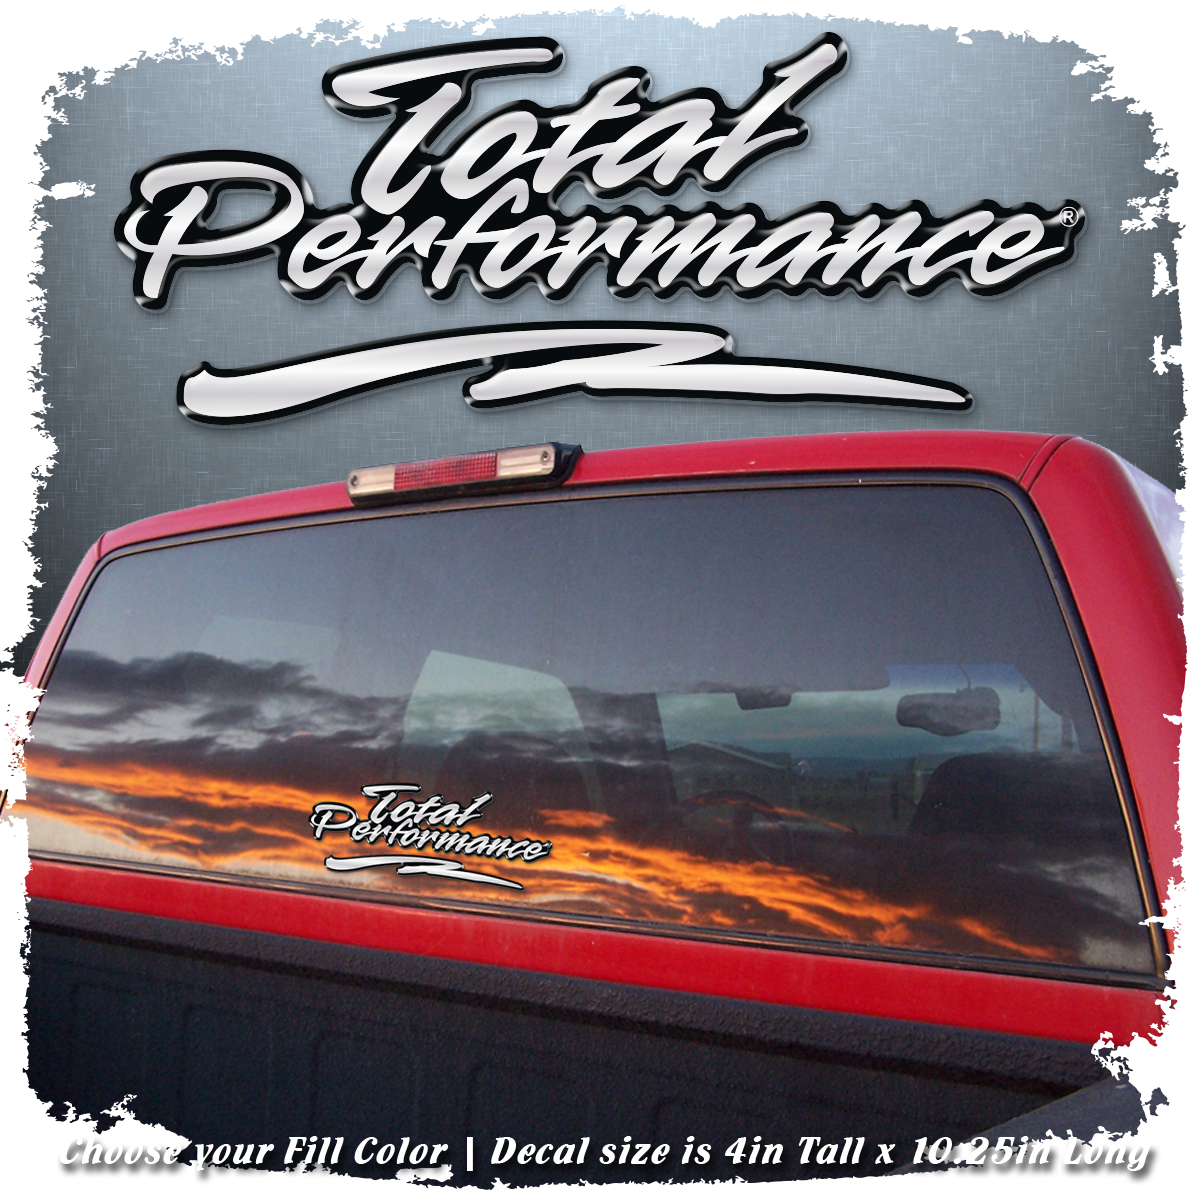 Domed Bullet Total Performance Decal, Choose Your Color (1 decal)